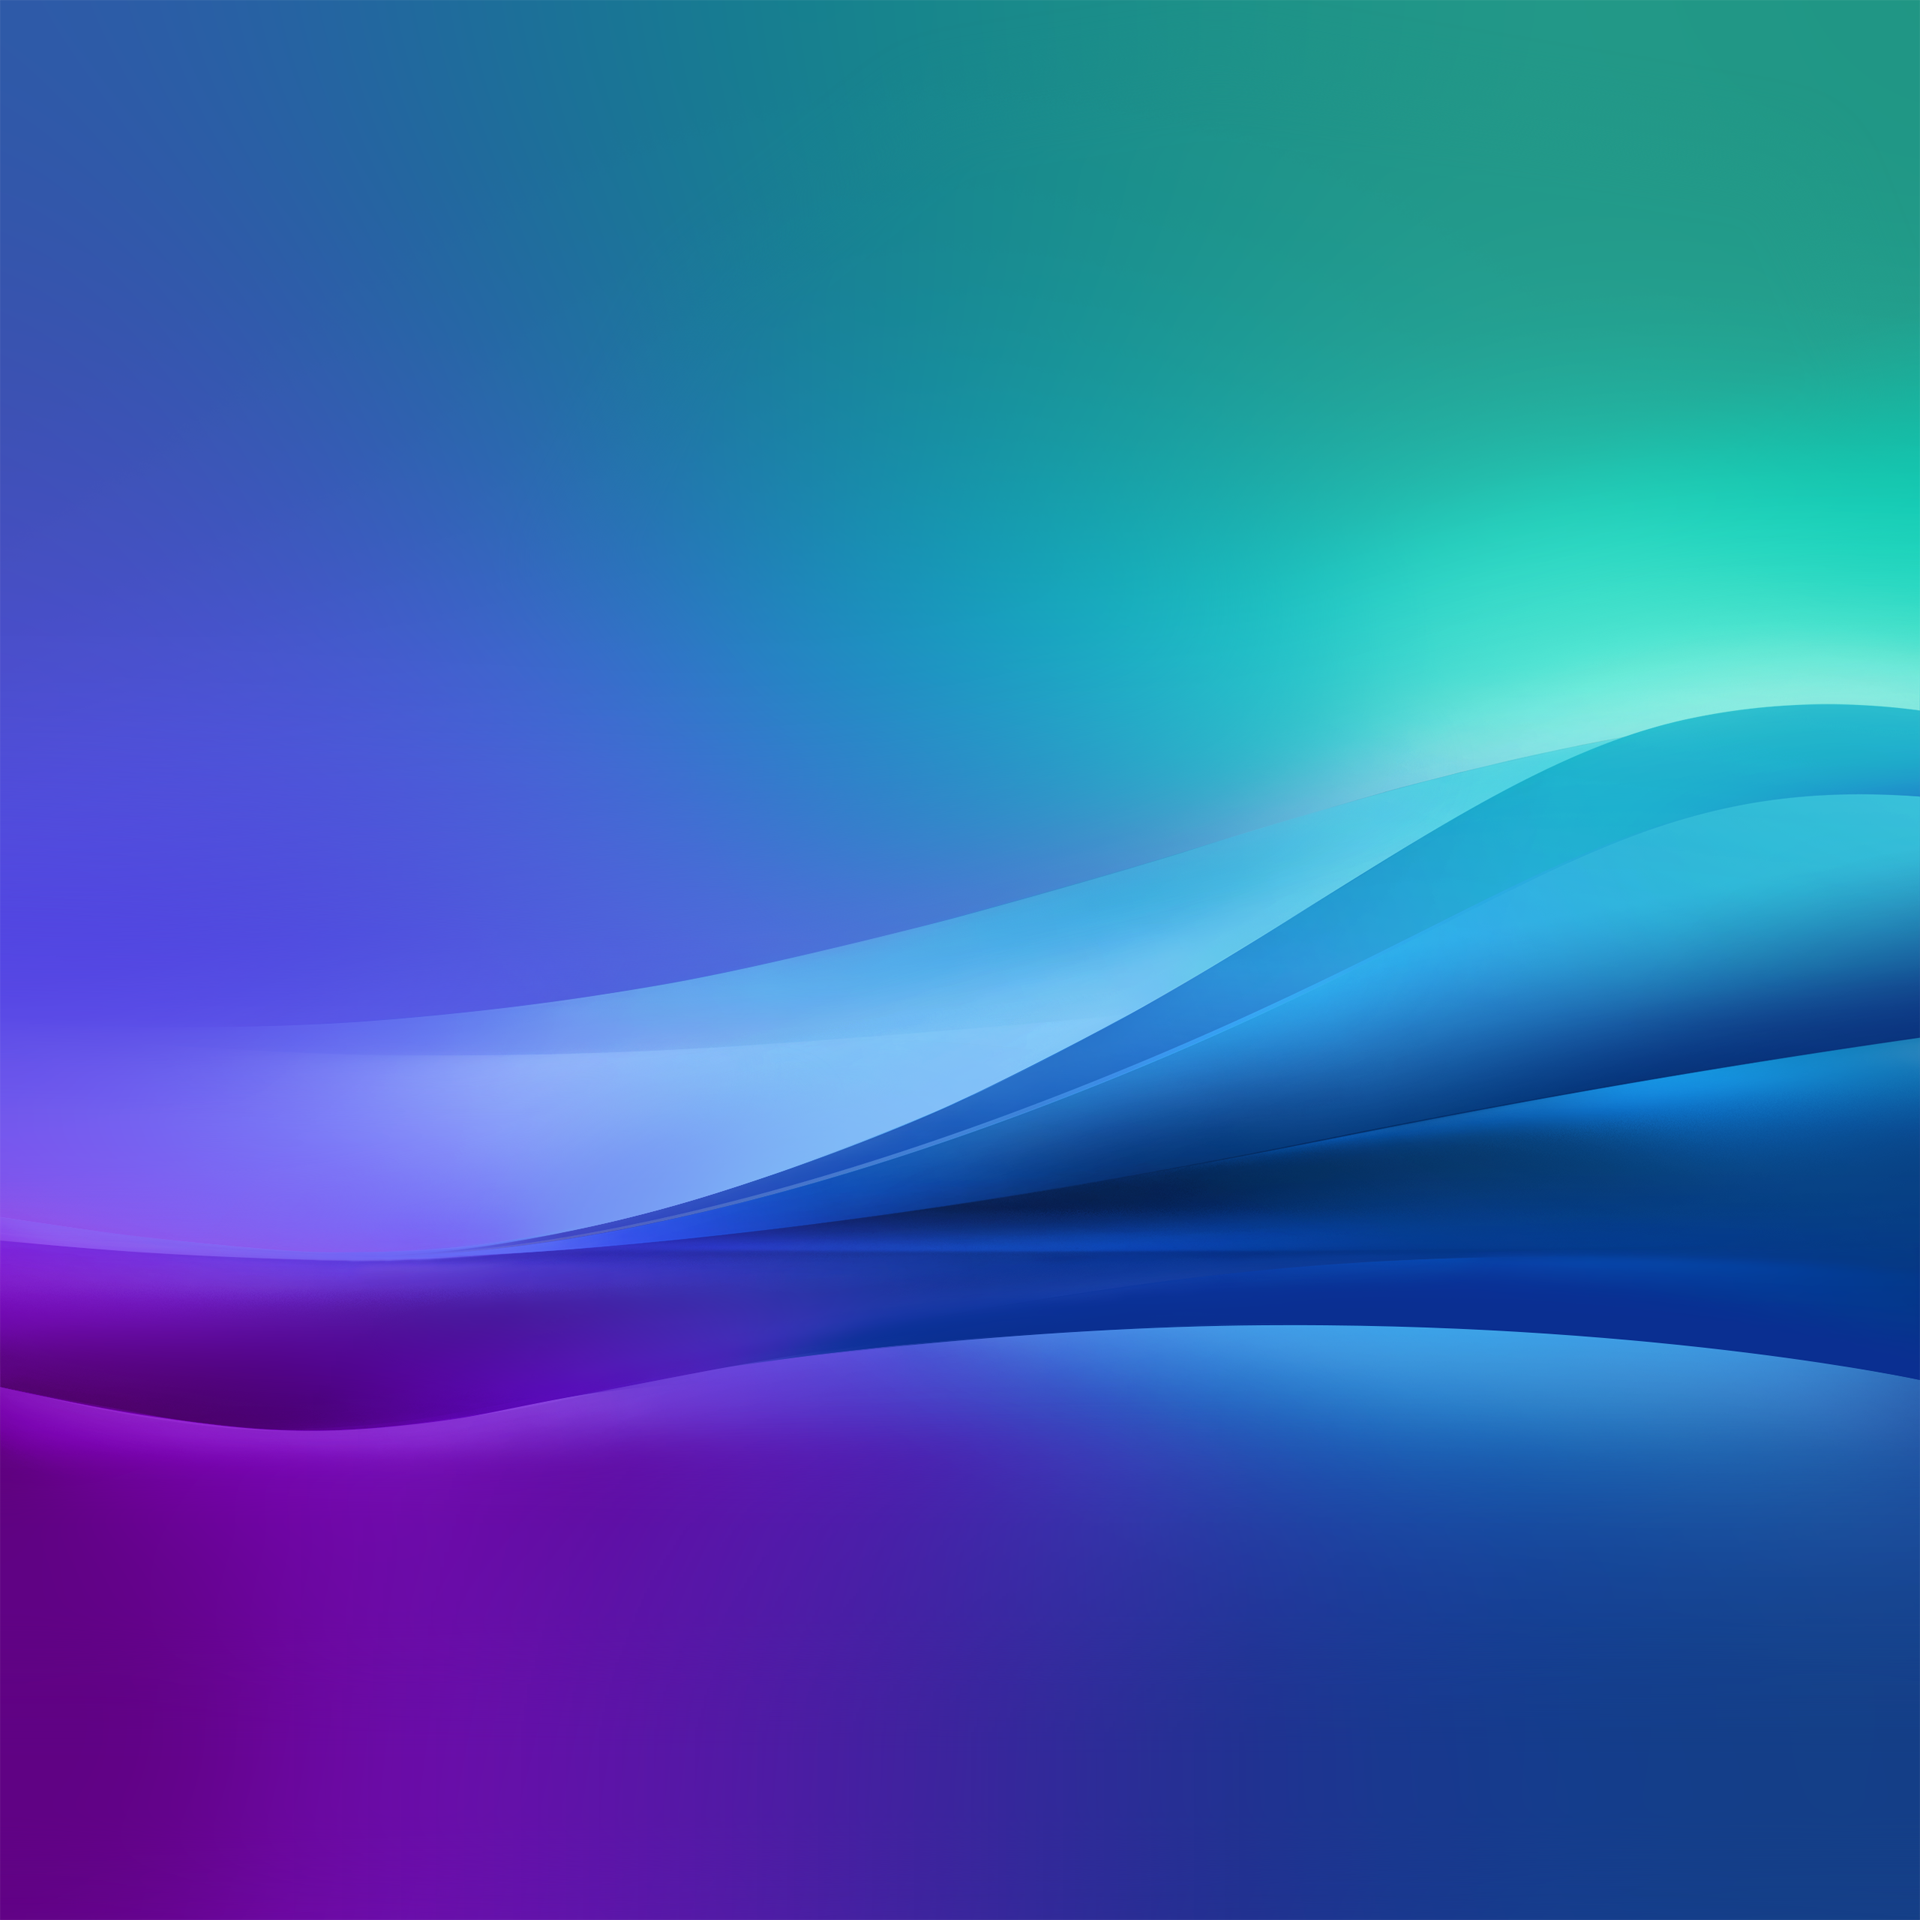 Free Download Galaxy S8 Wallpaper Icon Wallpaper Hd Part 3 1920x1920 For Your Desktop Mobile Tablet Explore 94 Galaxy S8 Wallpapers Galaxy S8 Wallpapers Samsung Galaxy S8 Wallpapers Samsung